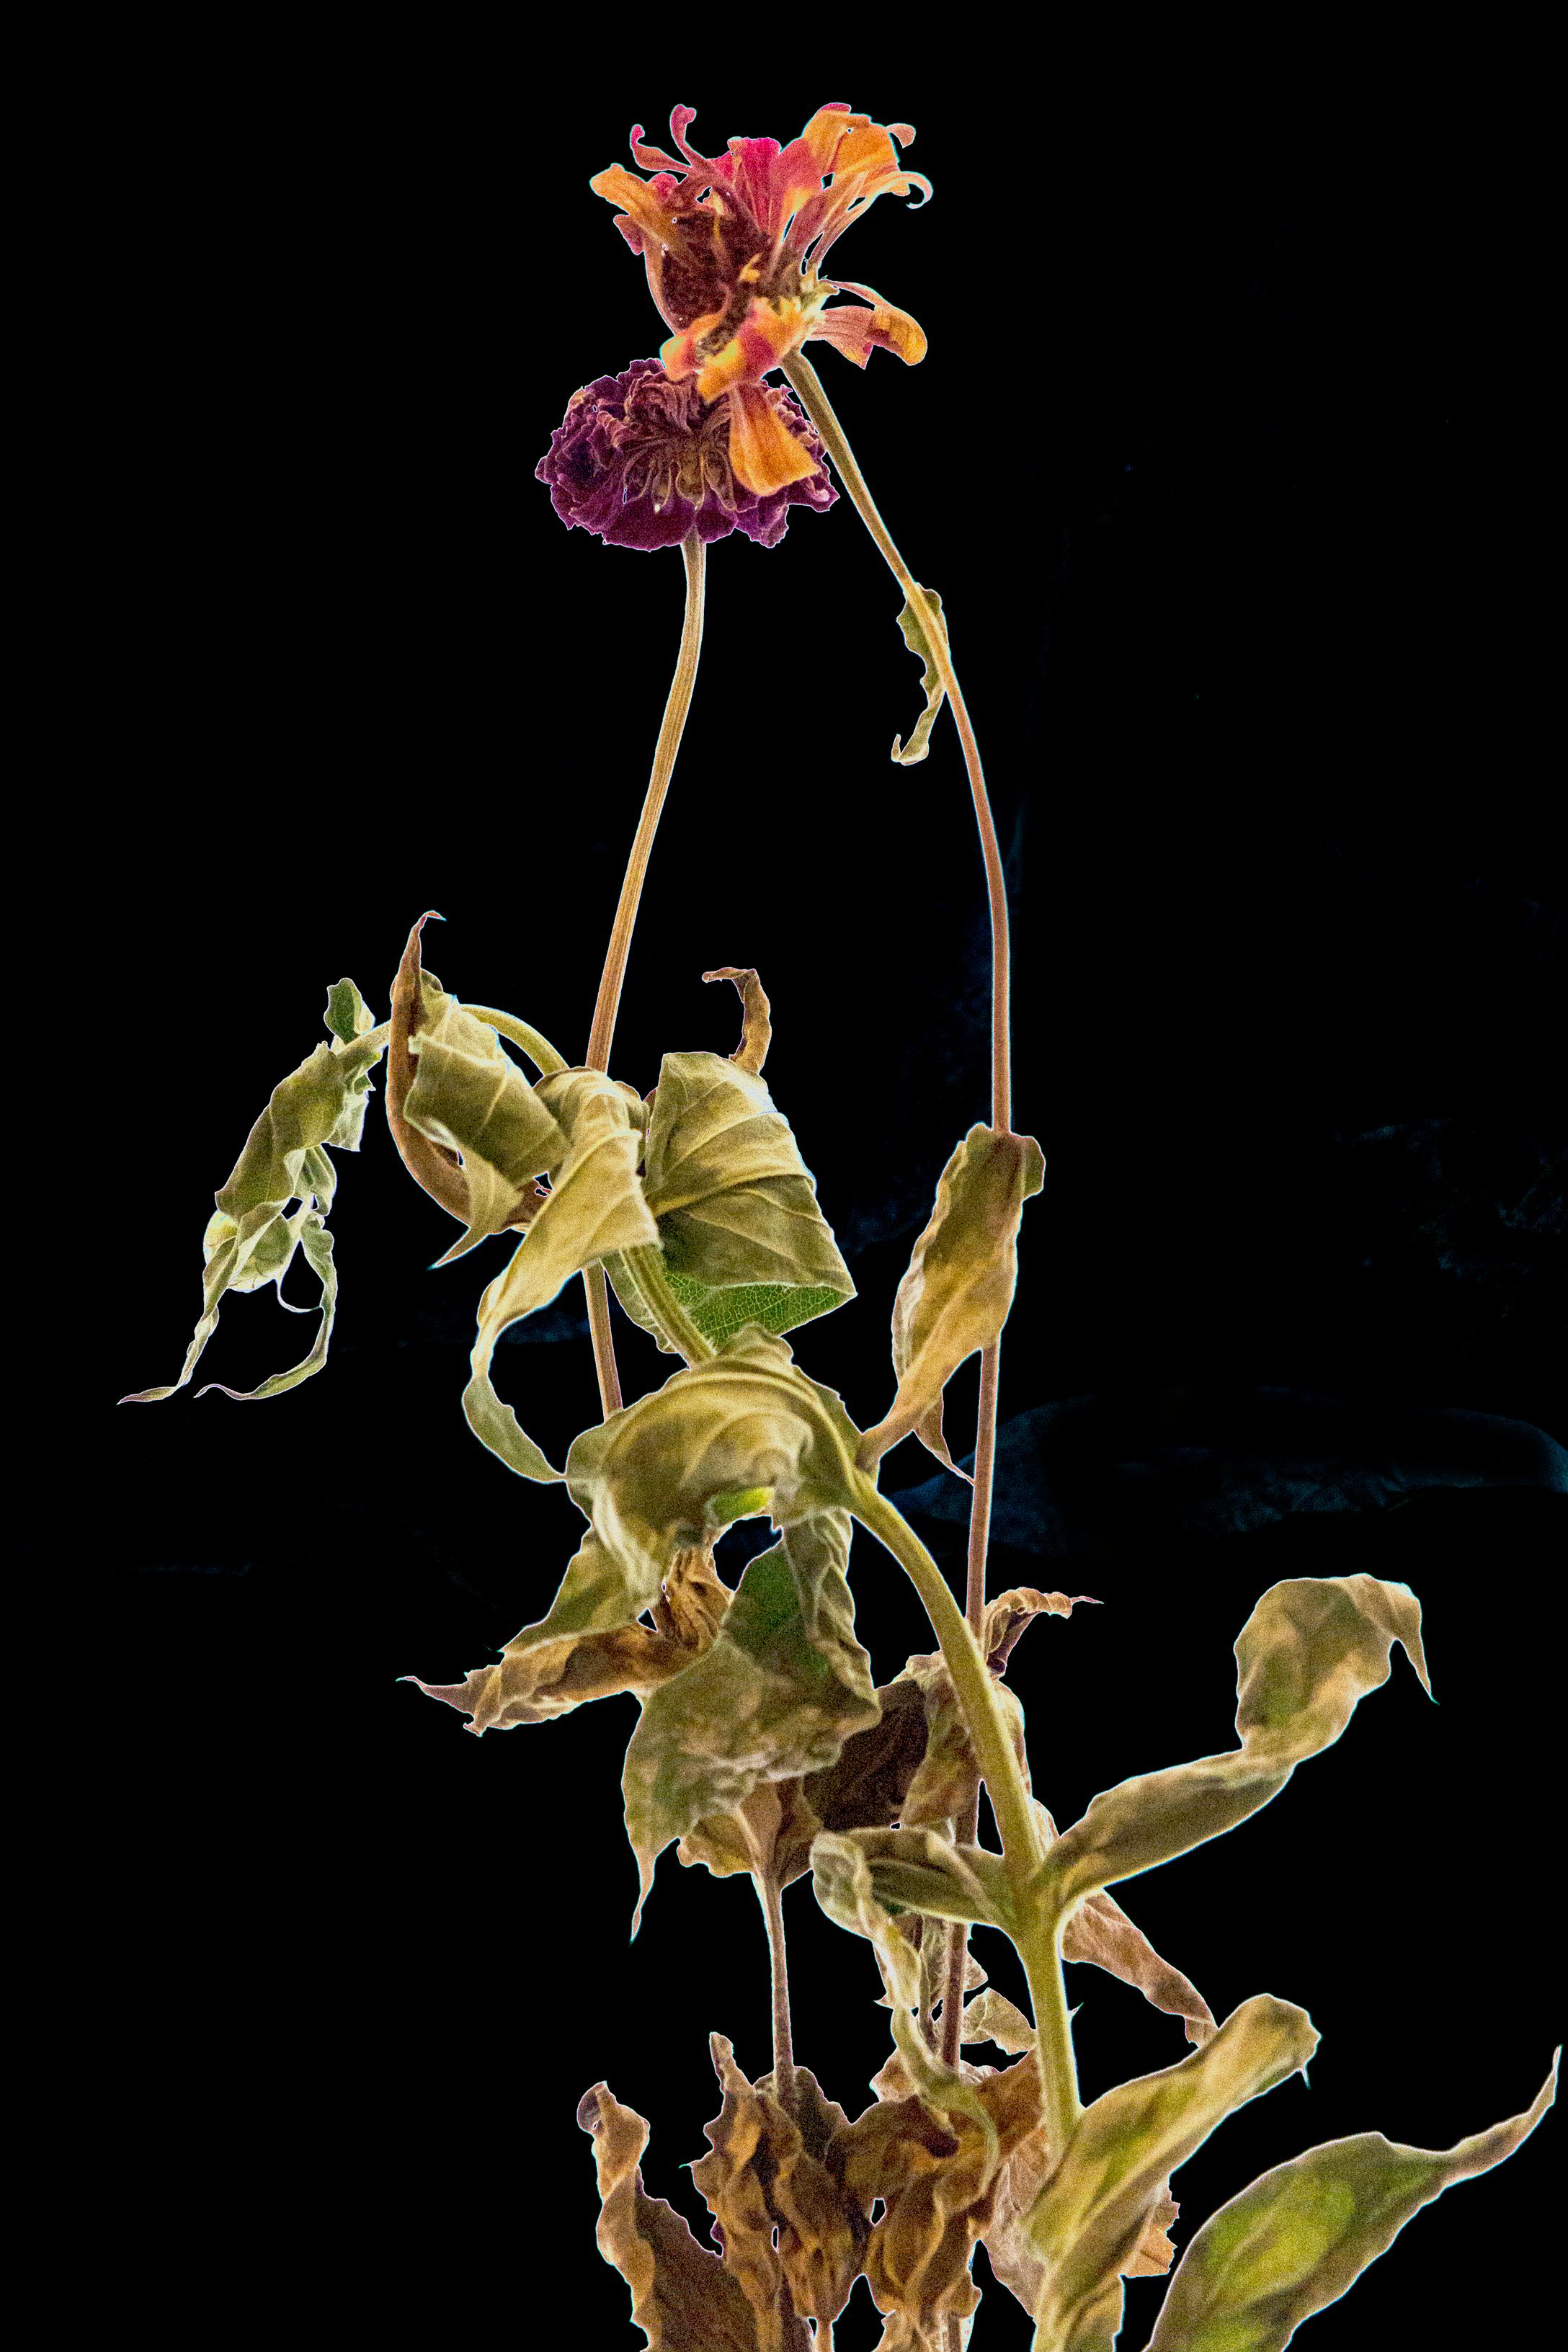 Floral Study 13: still life color photograph w/ dried flowers on black field